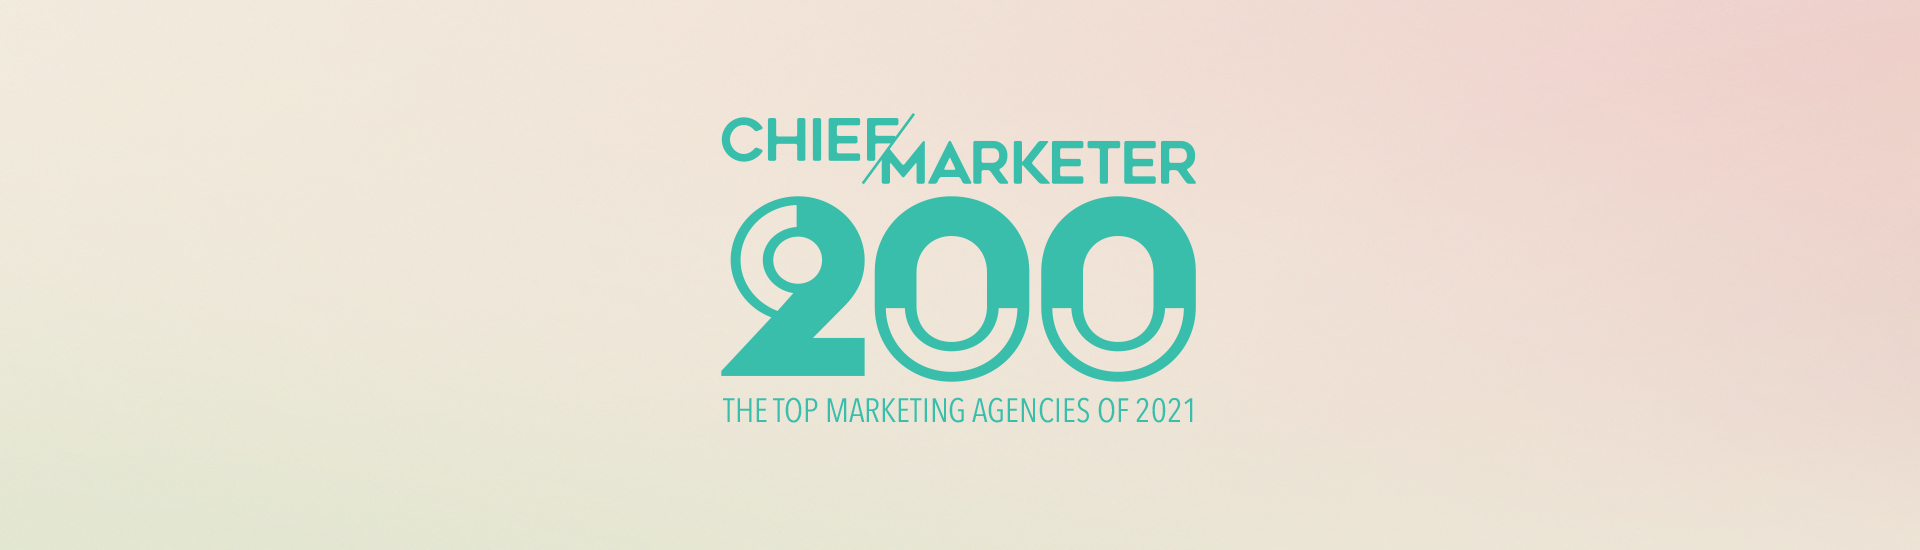 Chief Marketer Names Vye a Top Agency in 2021